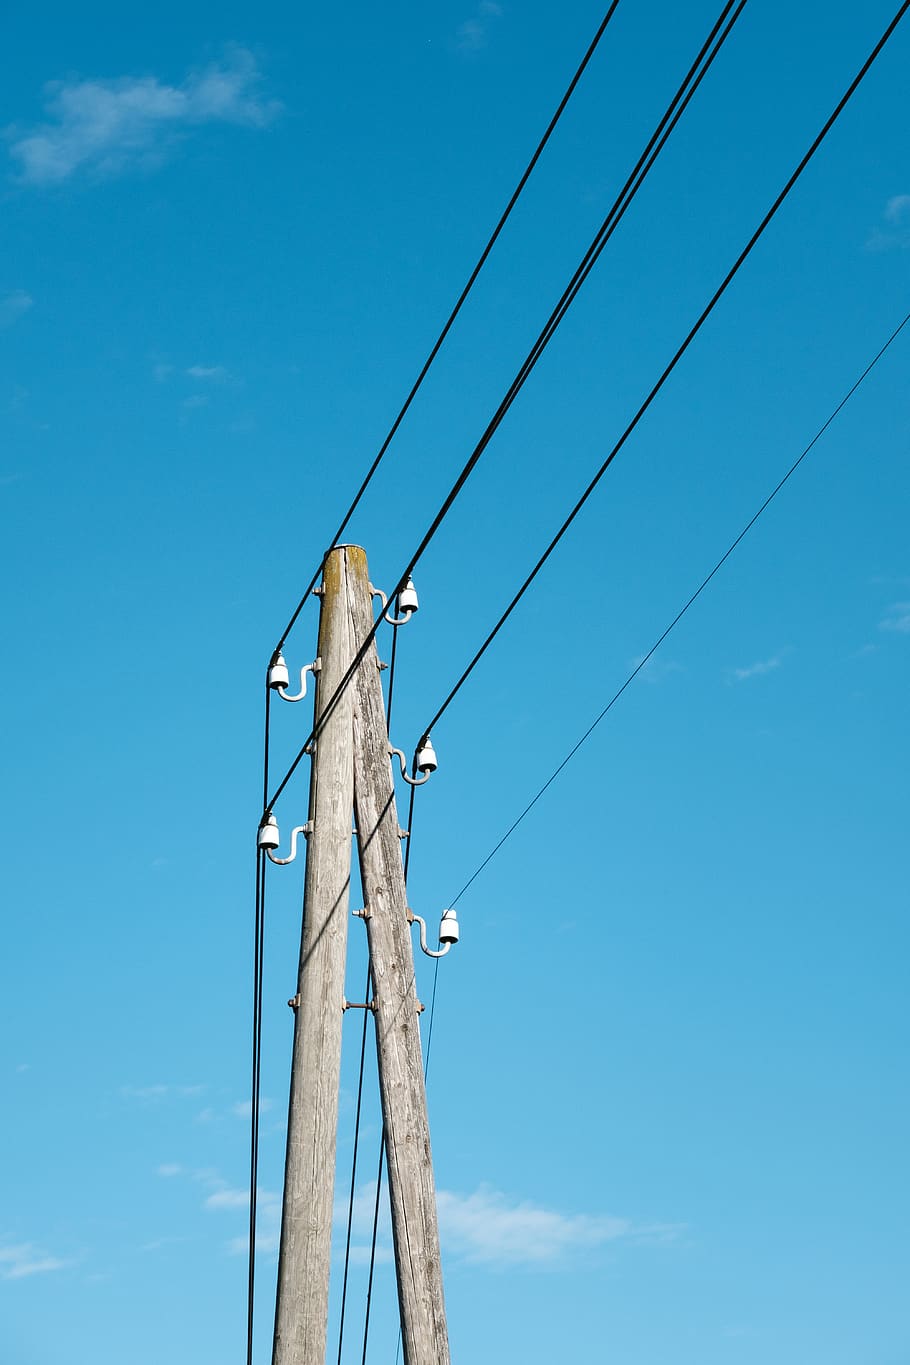 power lines going through tower during daytime, utility pole, HD wallpaper